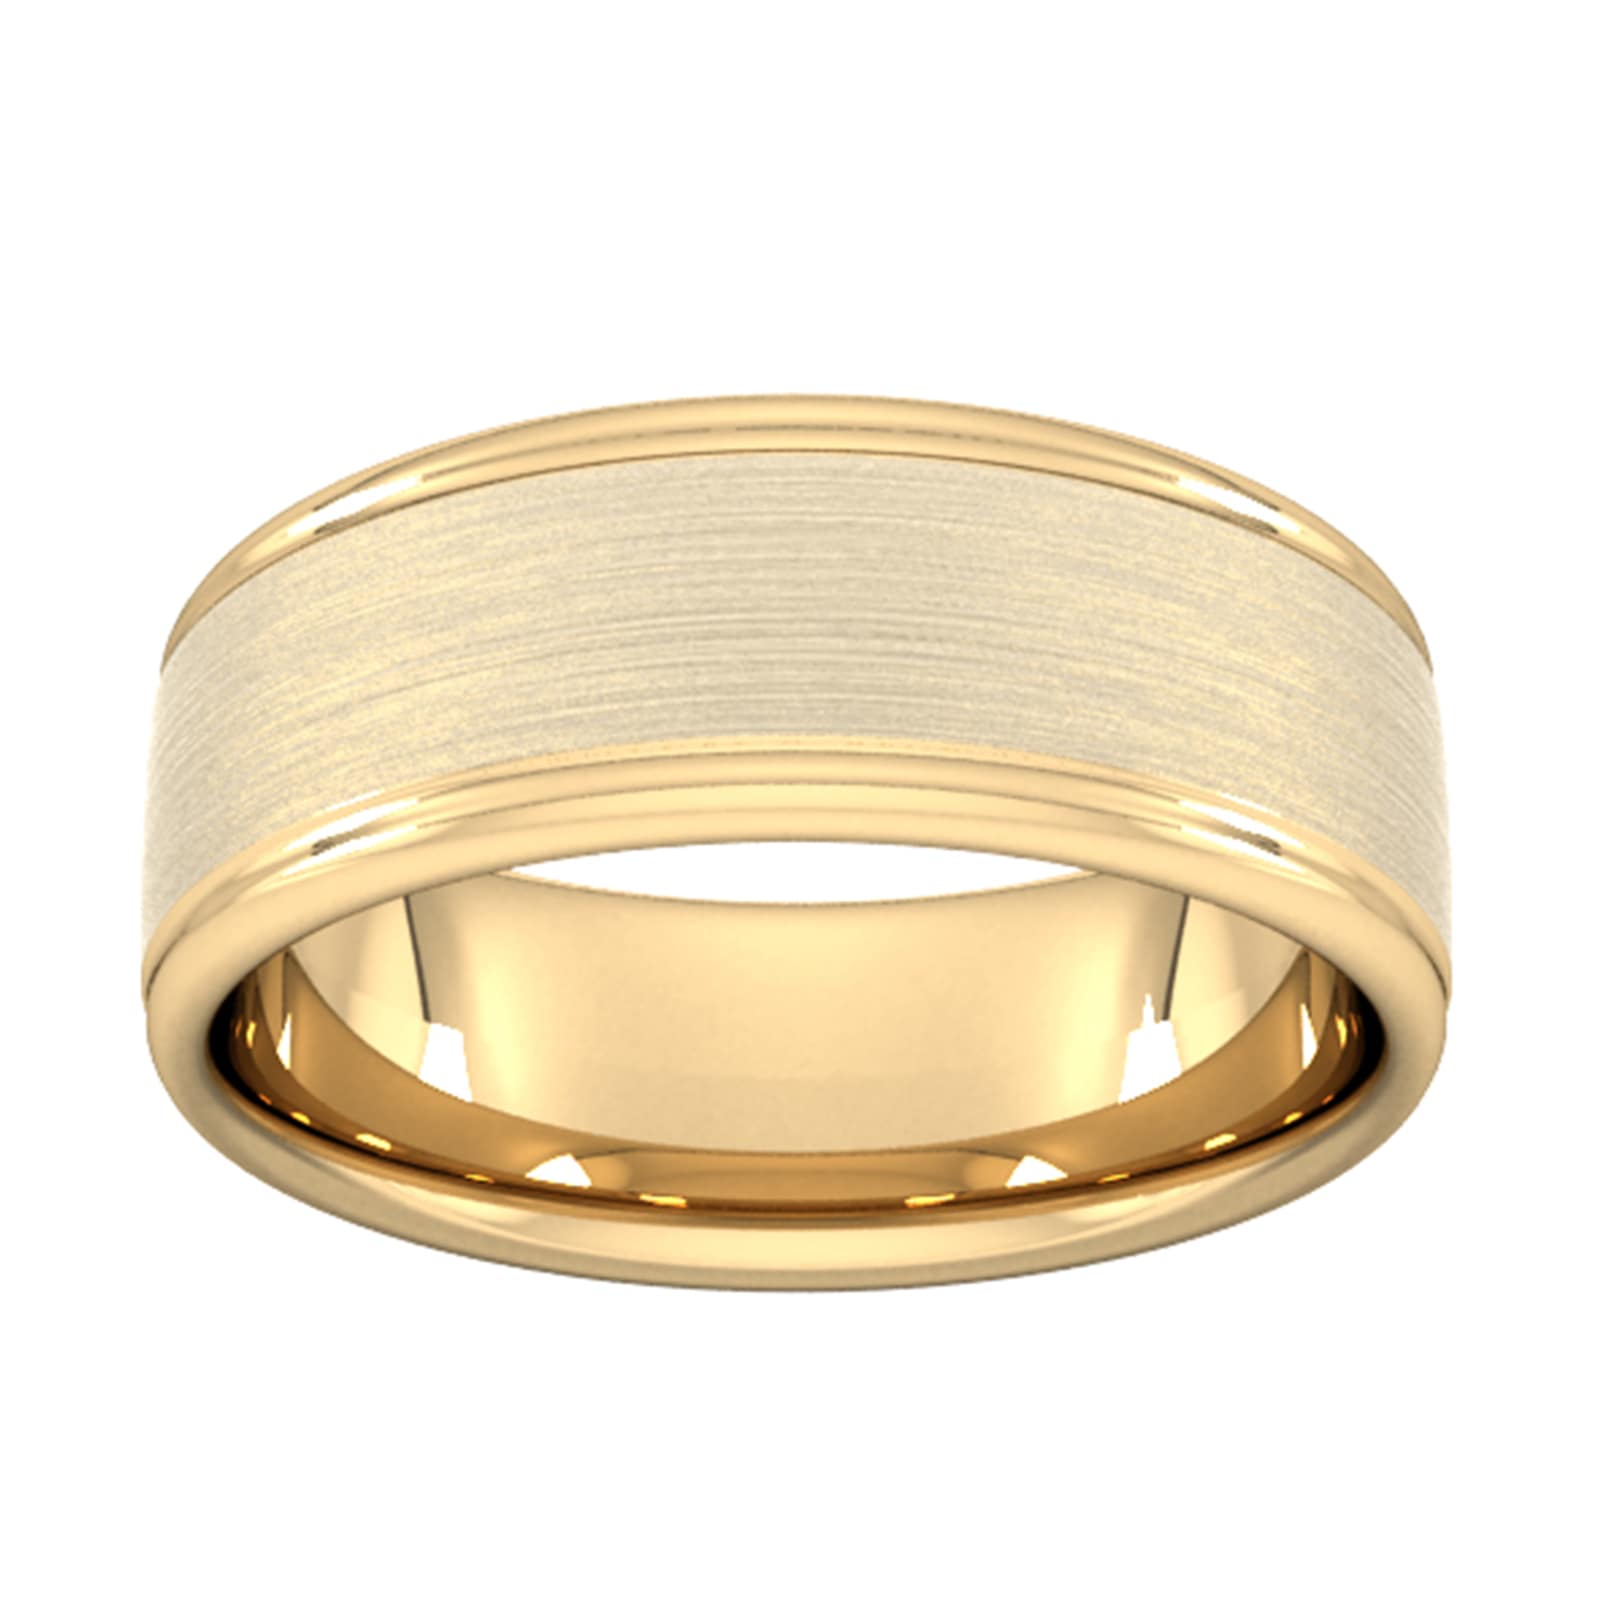 8mm Traditional Court Heavy Matt Centre With Grooves Wedding Ring In 9 Carat Yellow Gold - Ring Size Q